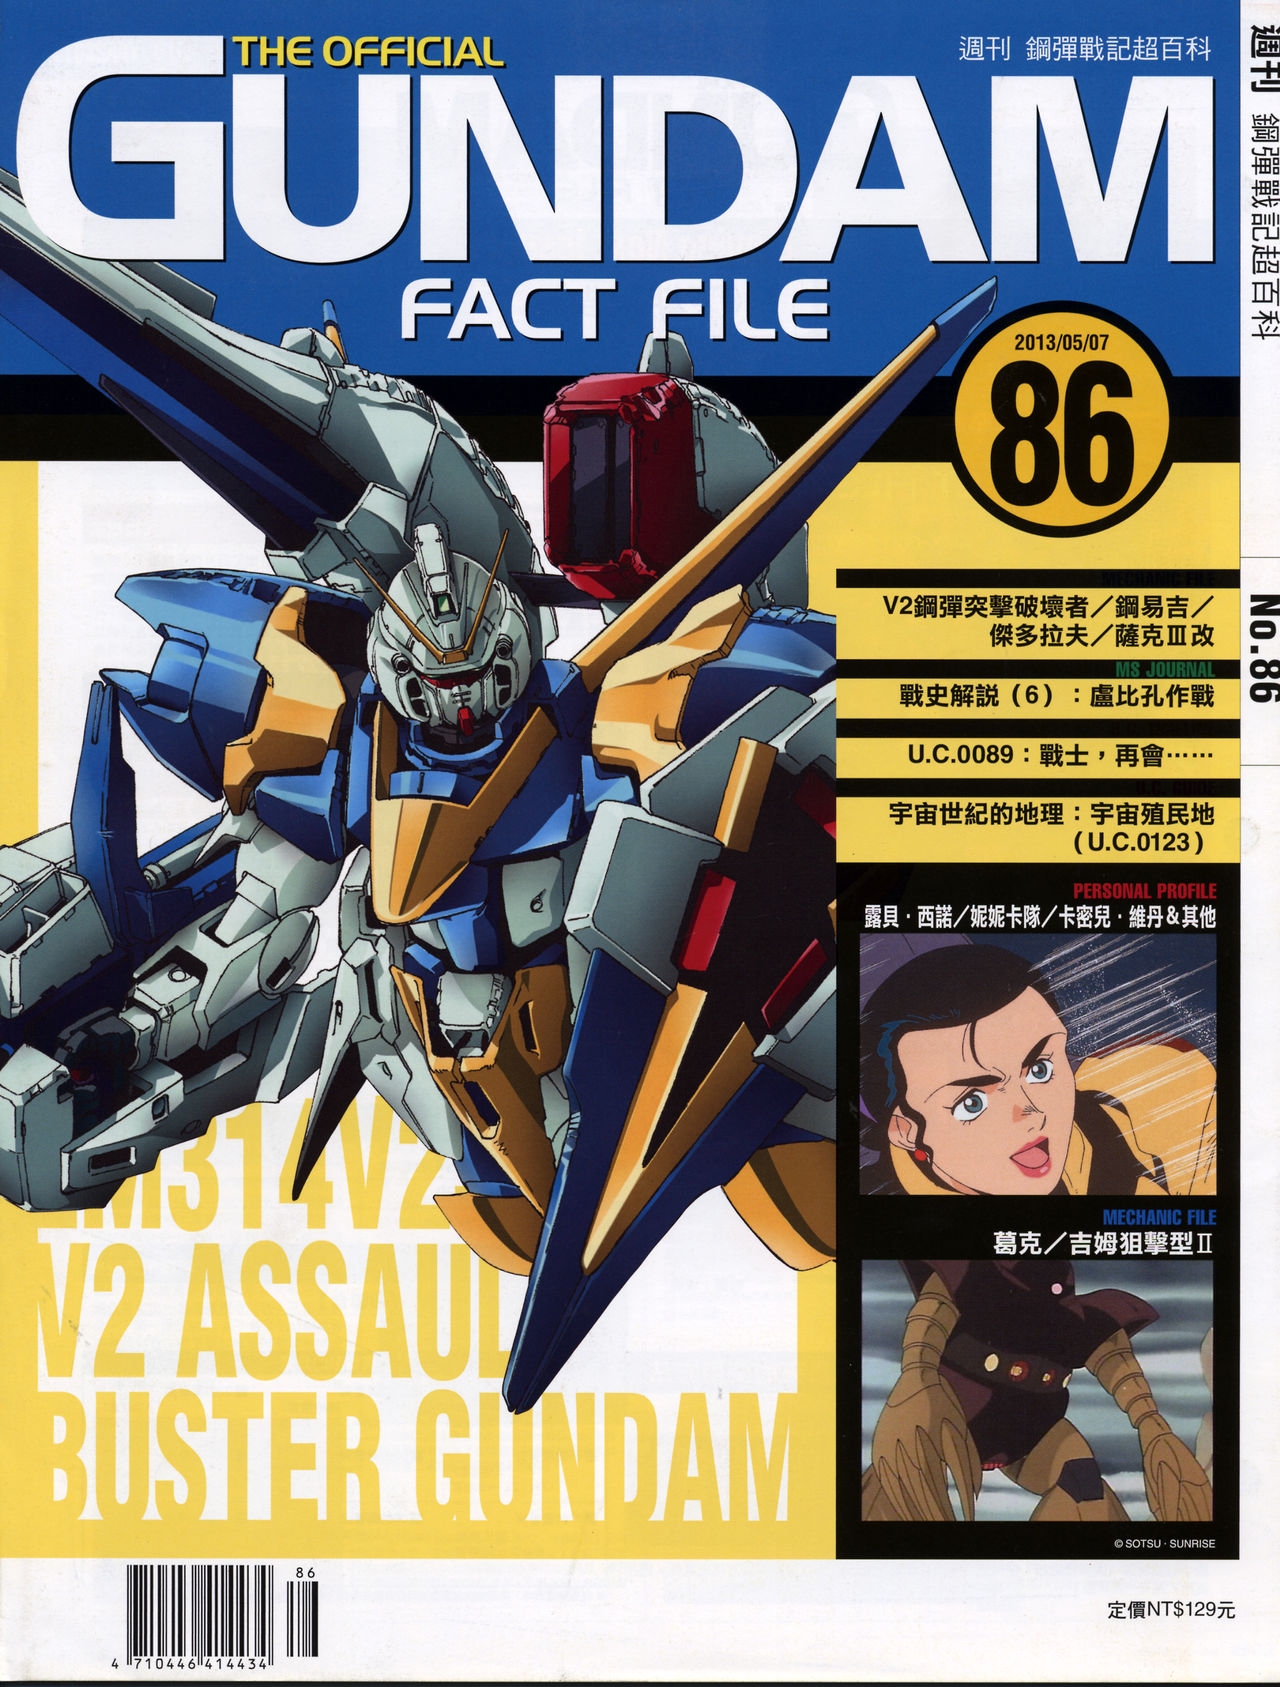 The Official Gundam Fact File - 086 [Chinese] 35